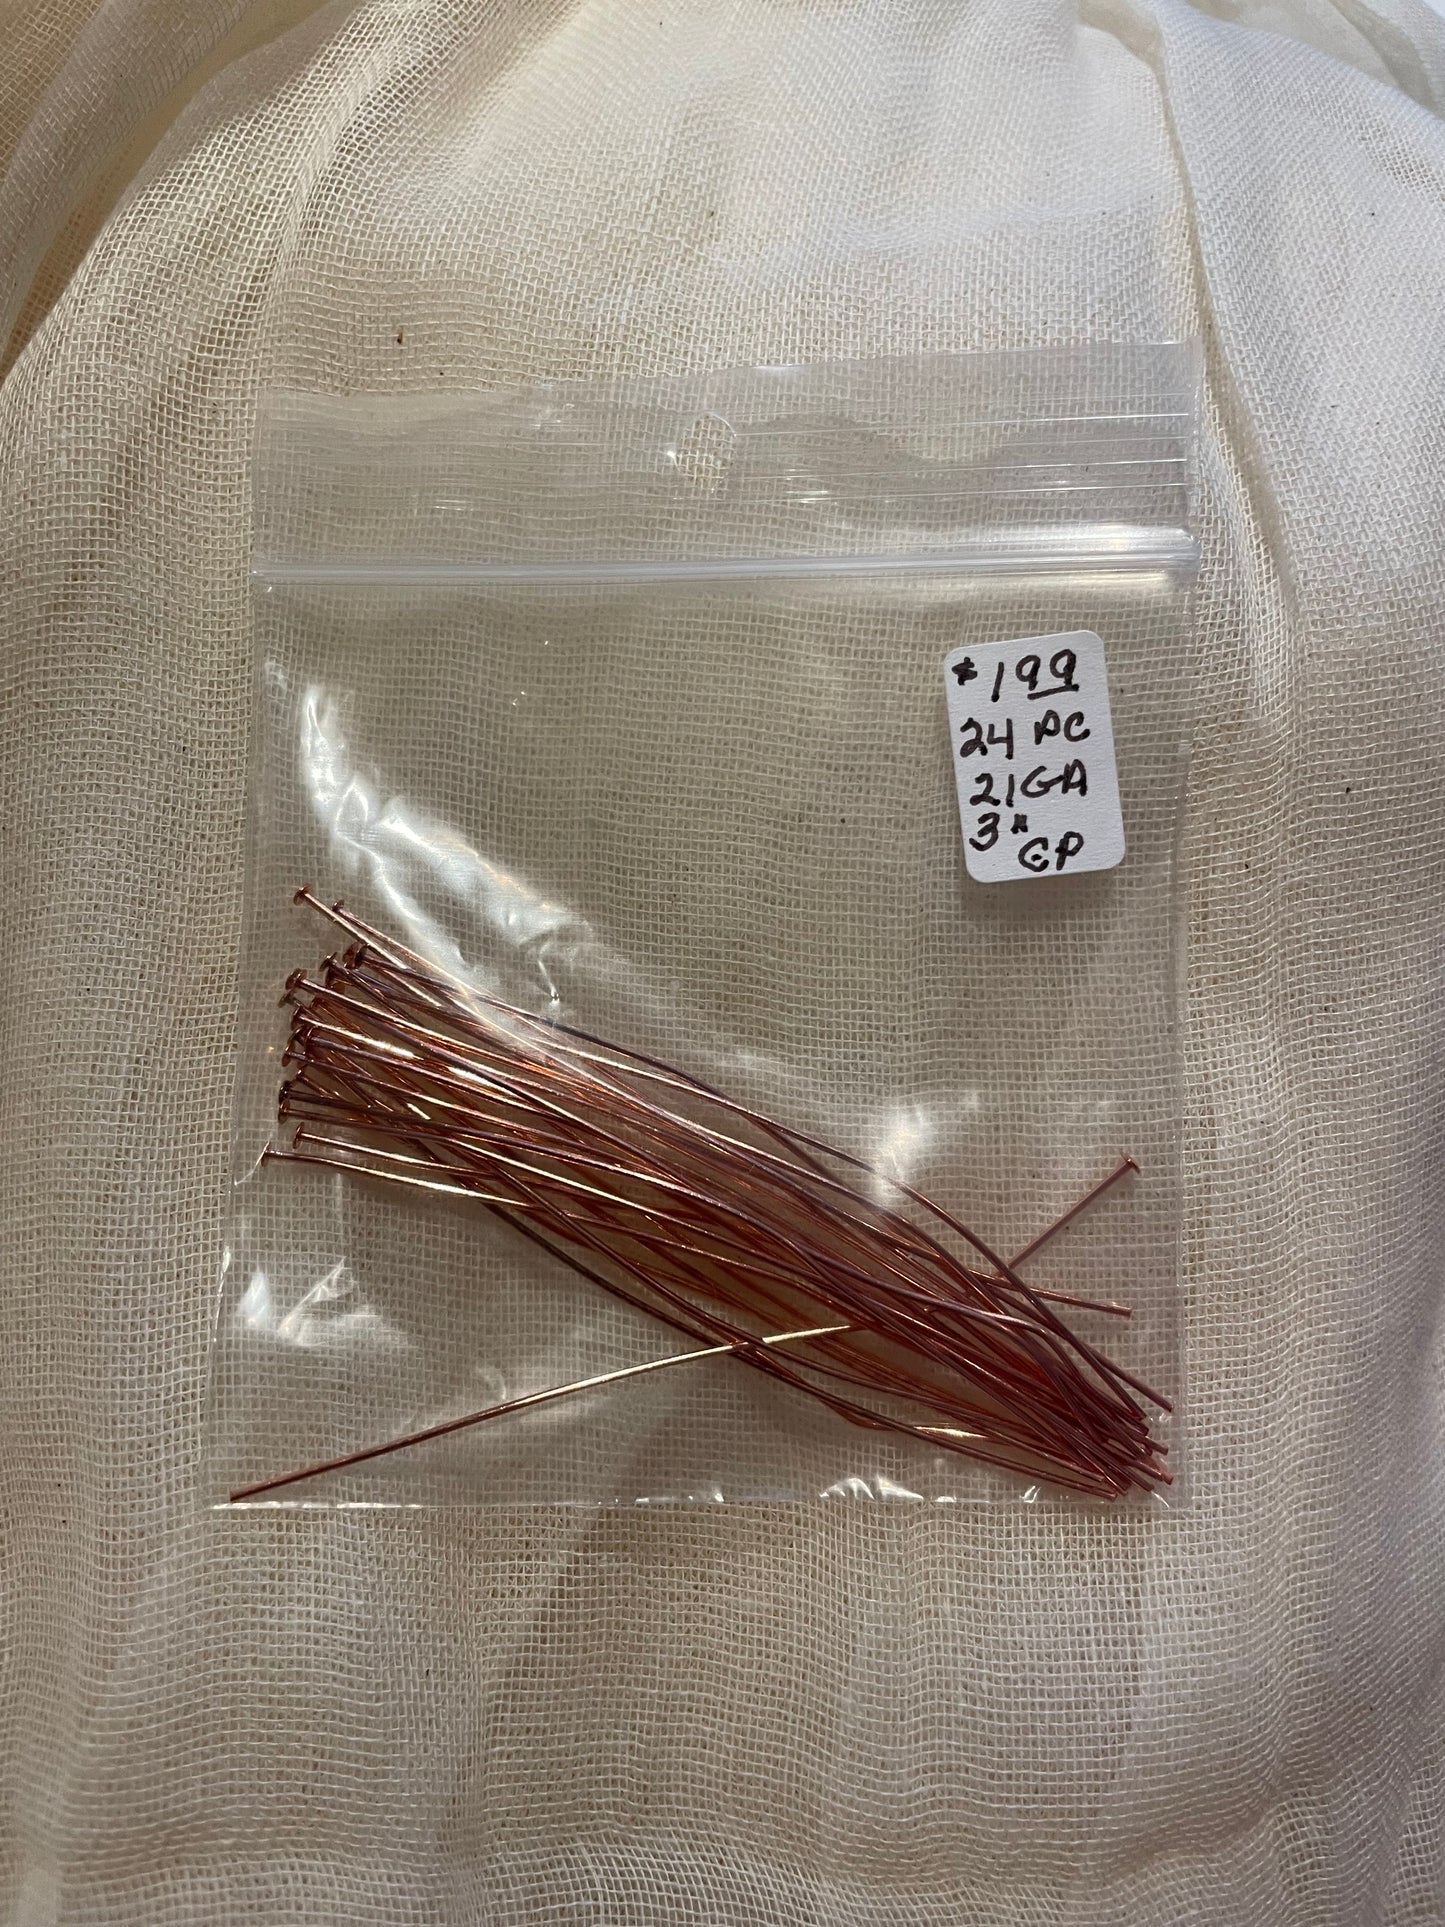 Flat Copper Plated Headpins 3"